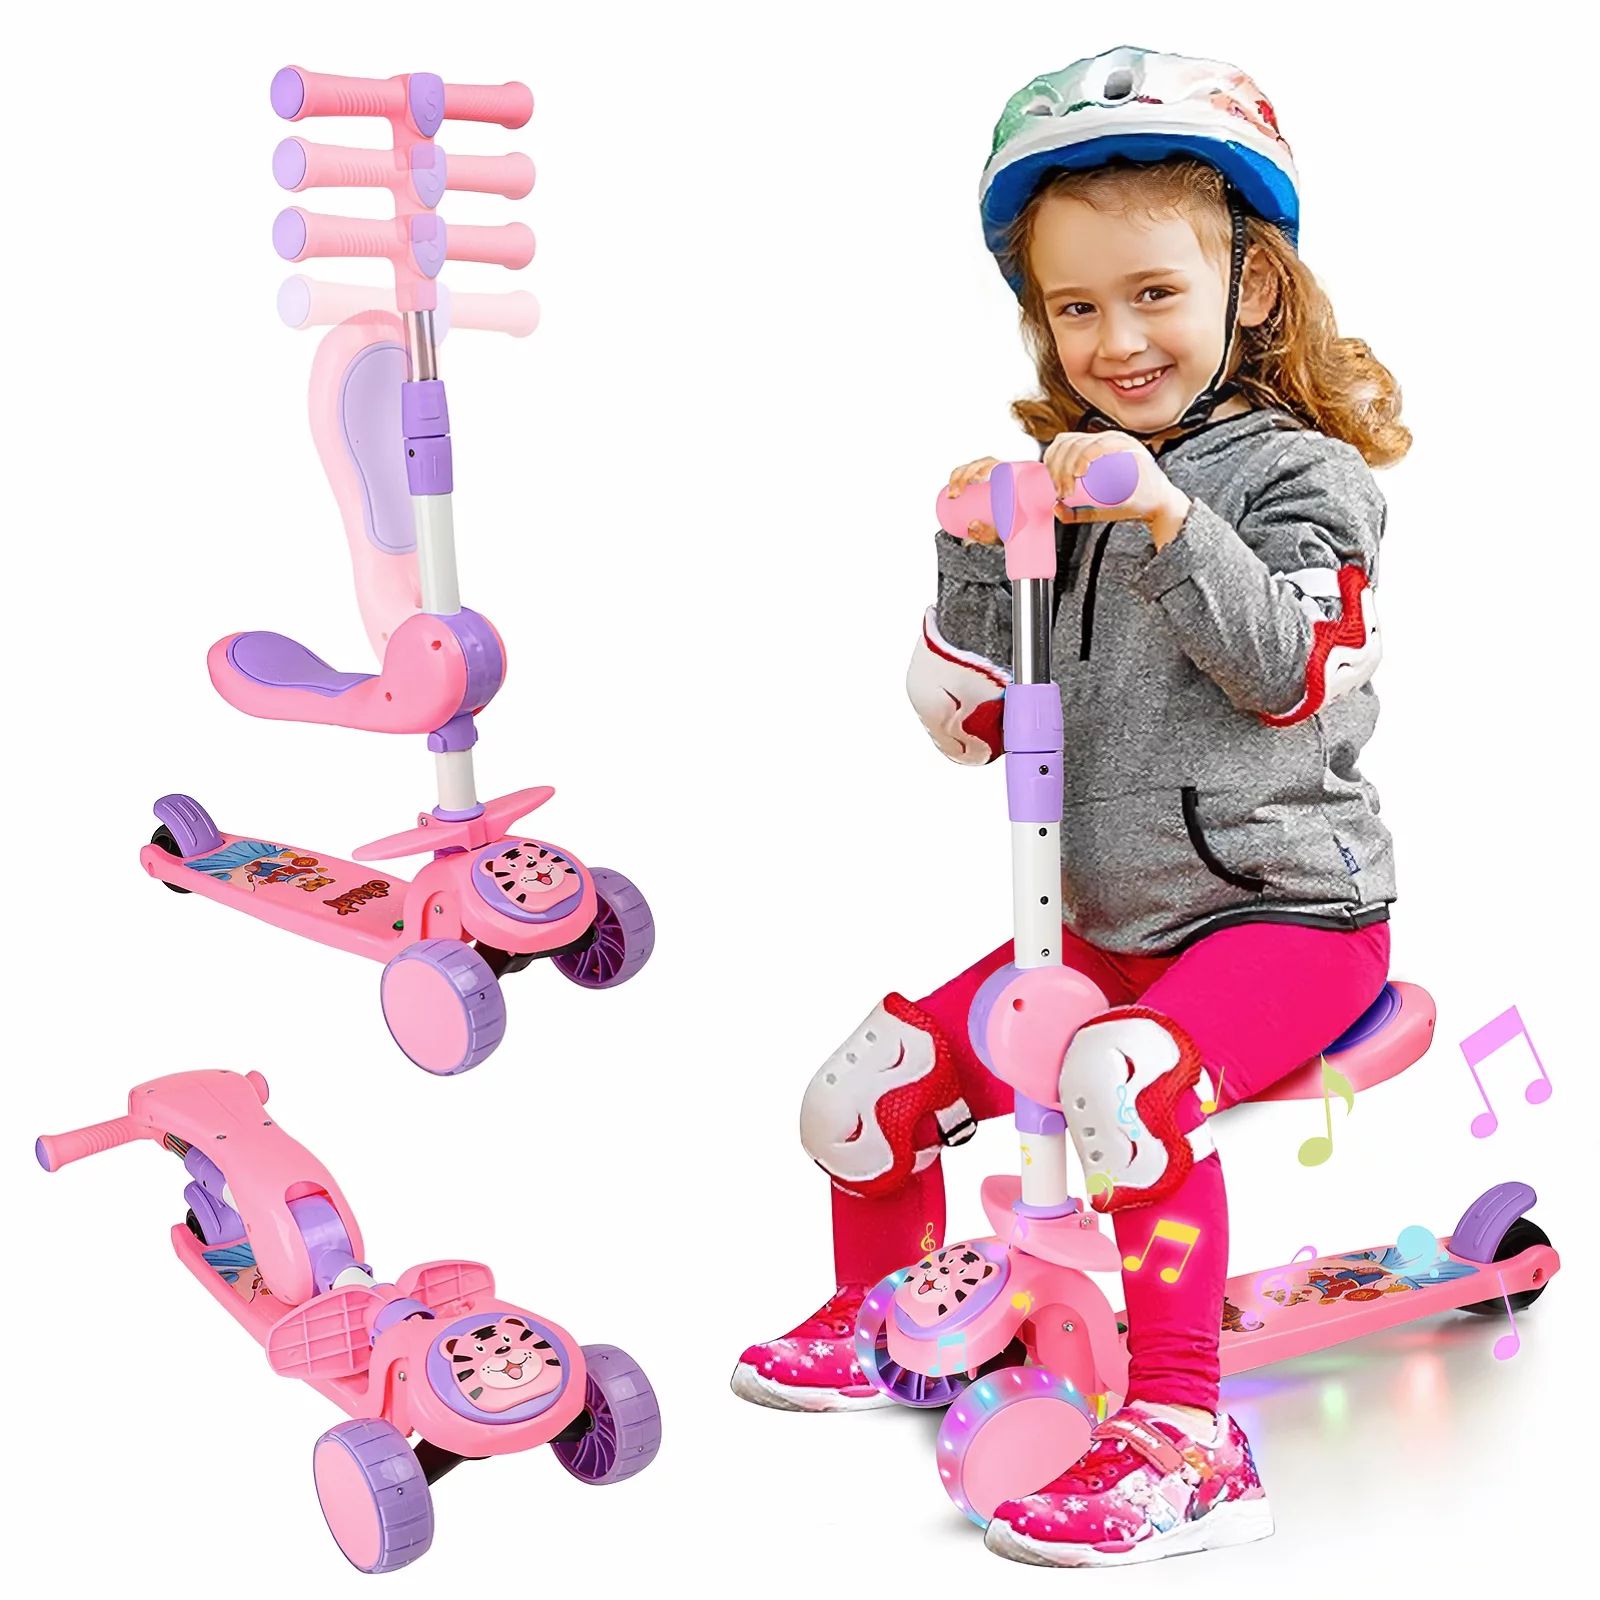 Beefunni Pink Sit-and-Scoot Scooter for Girls, Adjustable Handlebar Kick Scooter, Wide Anti-Slip ... | Walmart (US)